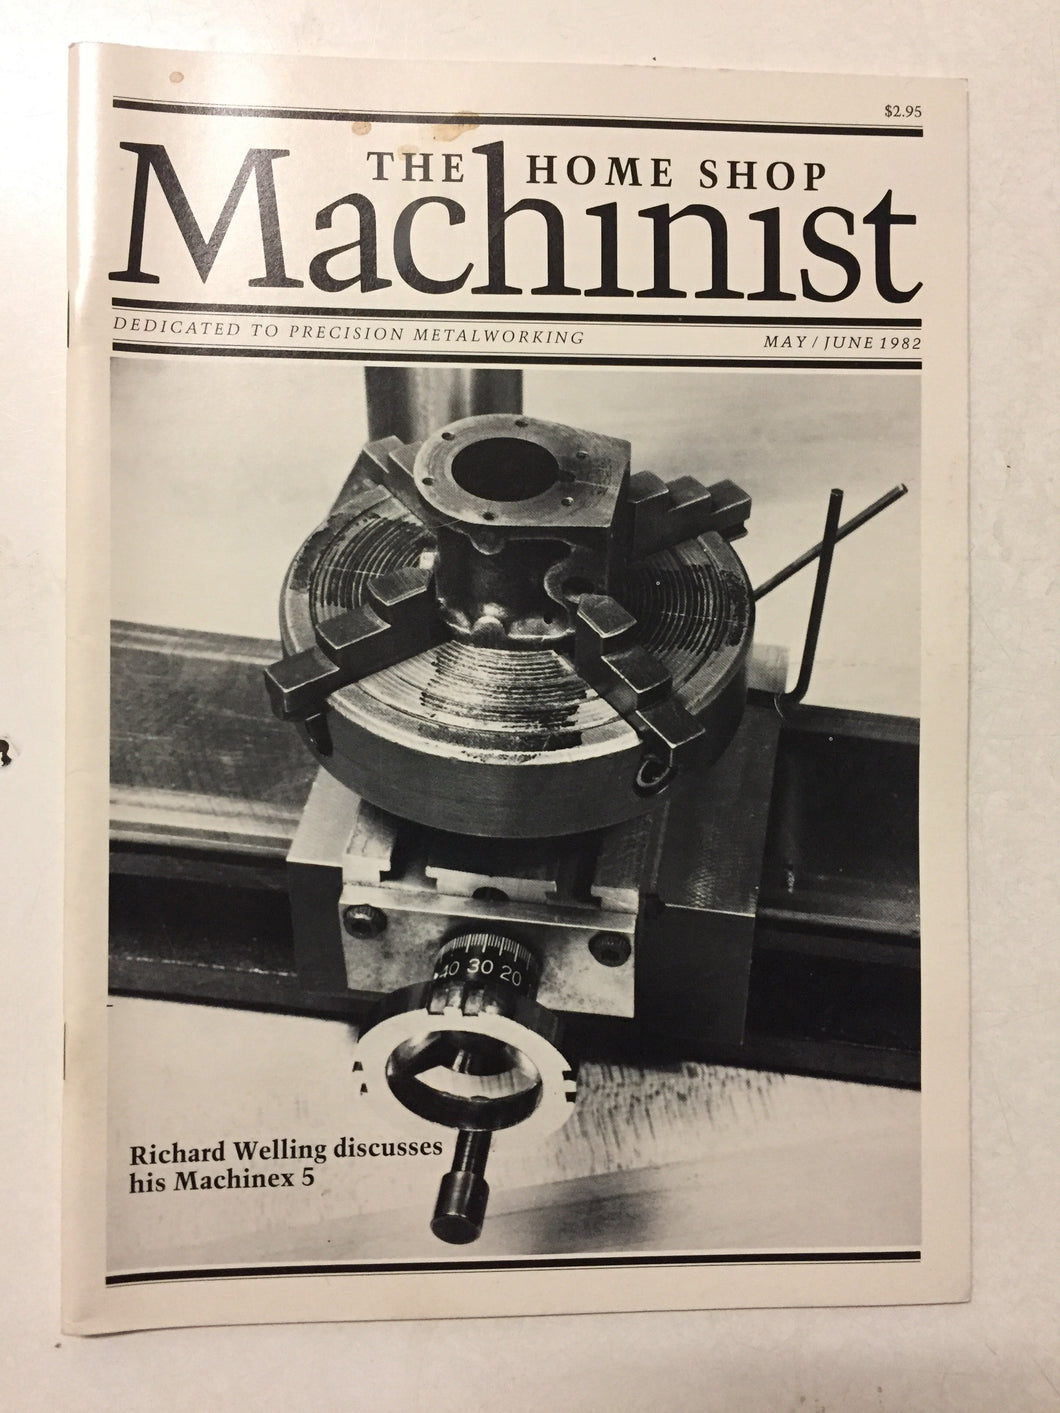 The Home Shop Machinist May/June 1982 - Slickcatbooks